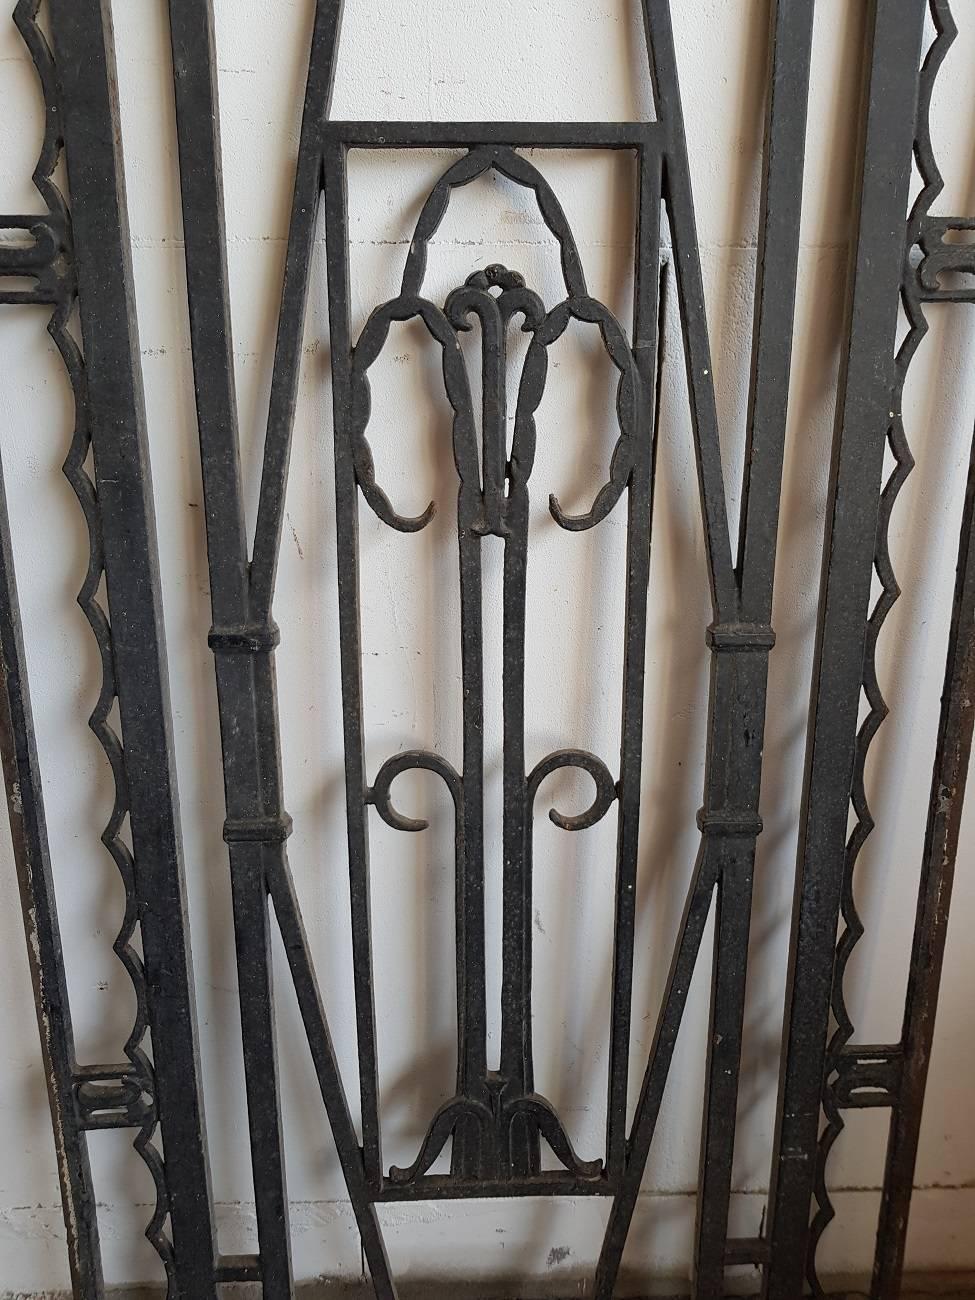 Sleek and Minimalist design French cast-iron door grill from the mid-20th century.

The measurements are,
Depth 1.3 cm/ 0.5 inch.
Width 55 cm/ 21.6 inch.
Height 100 cm/ 39.3 inch.
 